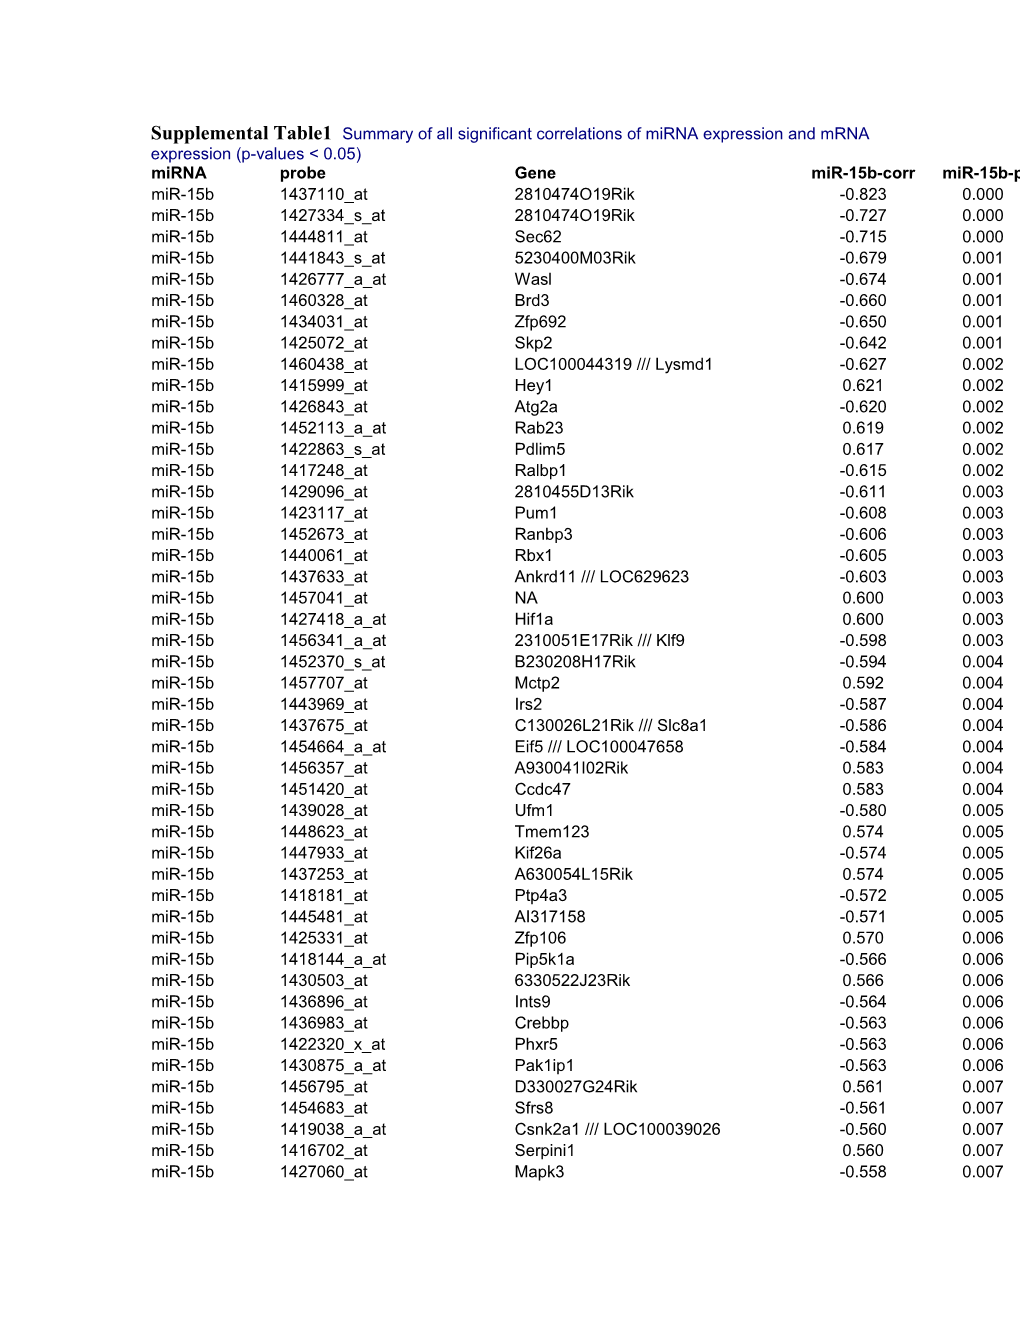 Supplemental Table1 Summary of All Significant Correlations of Mirna Expression and Mrna